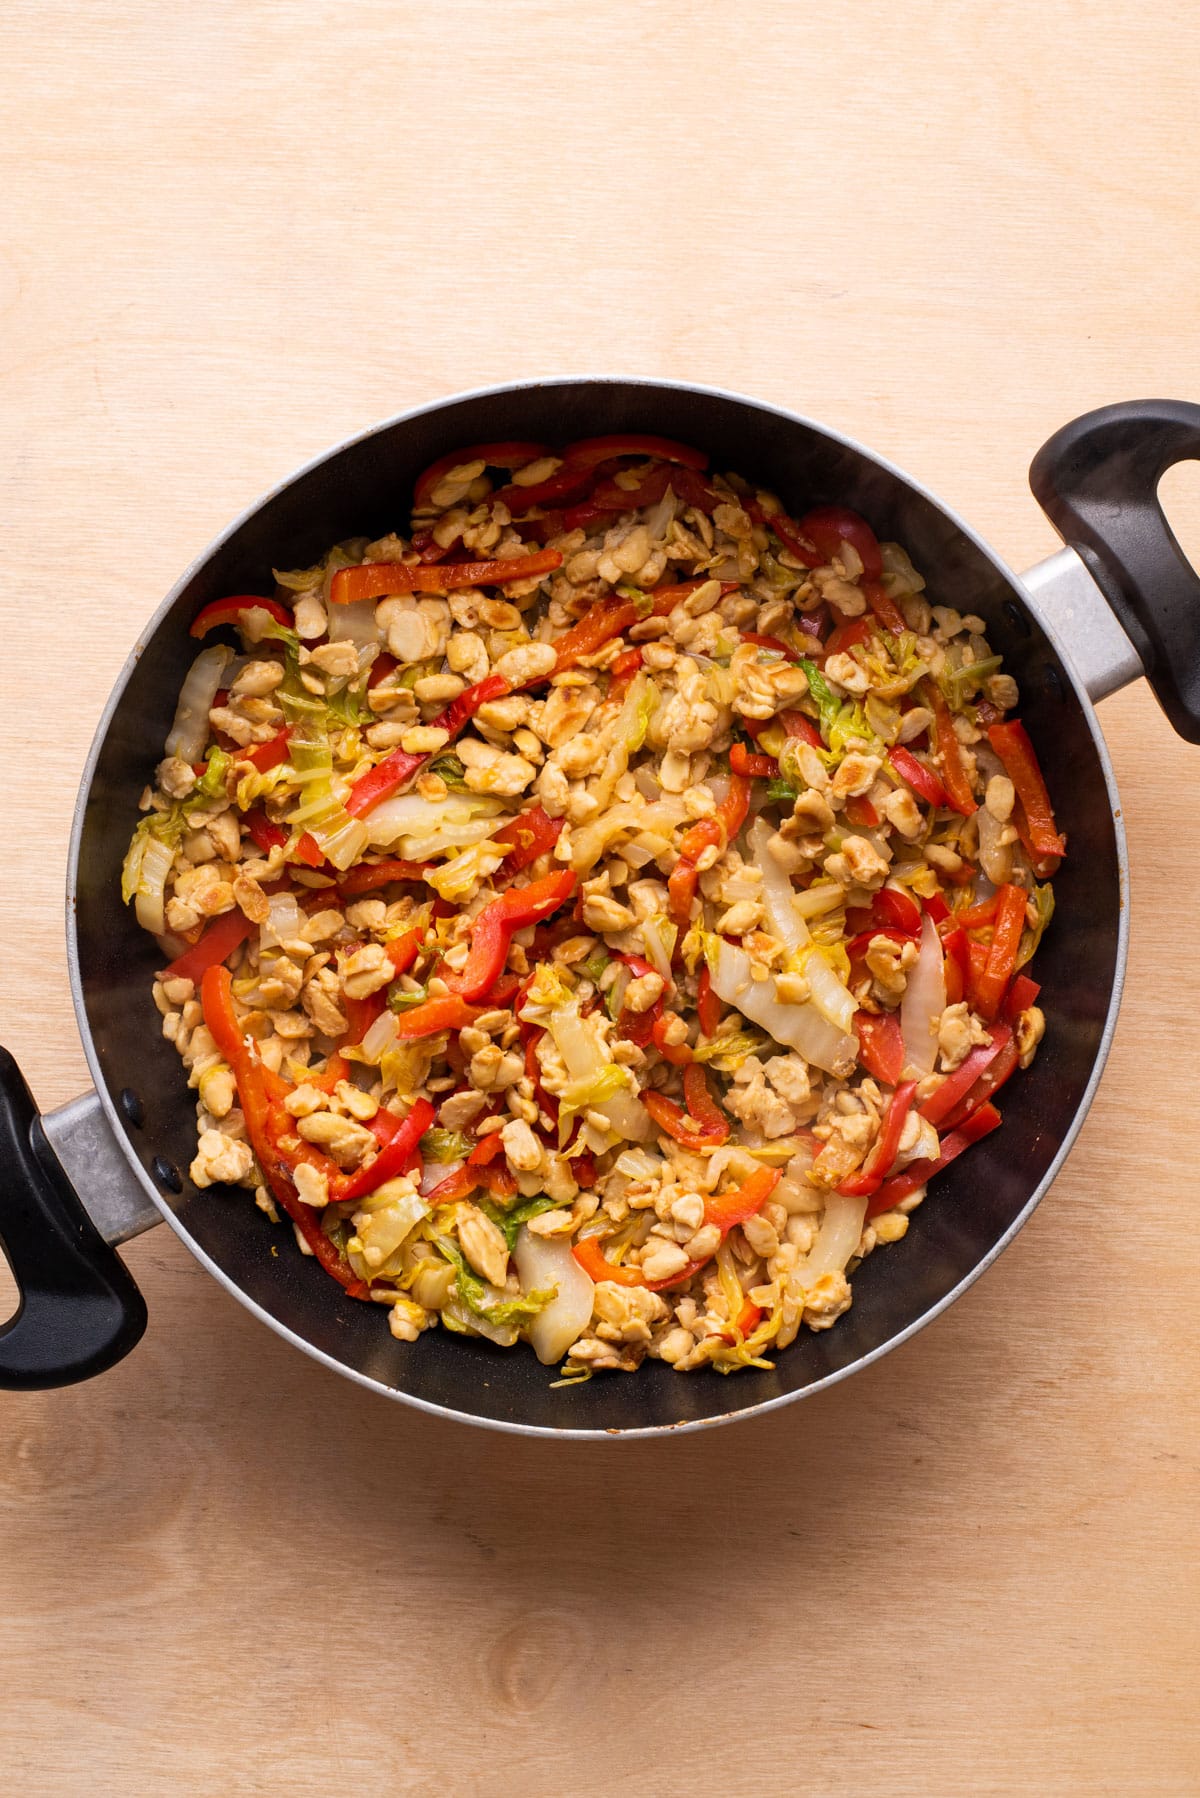 Stir-fried tempeh, bell peppers, and cabbage in a skillet.